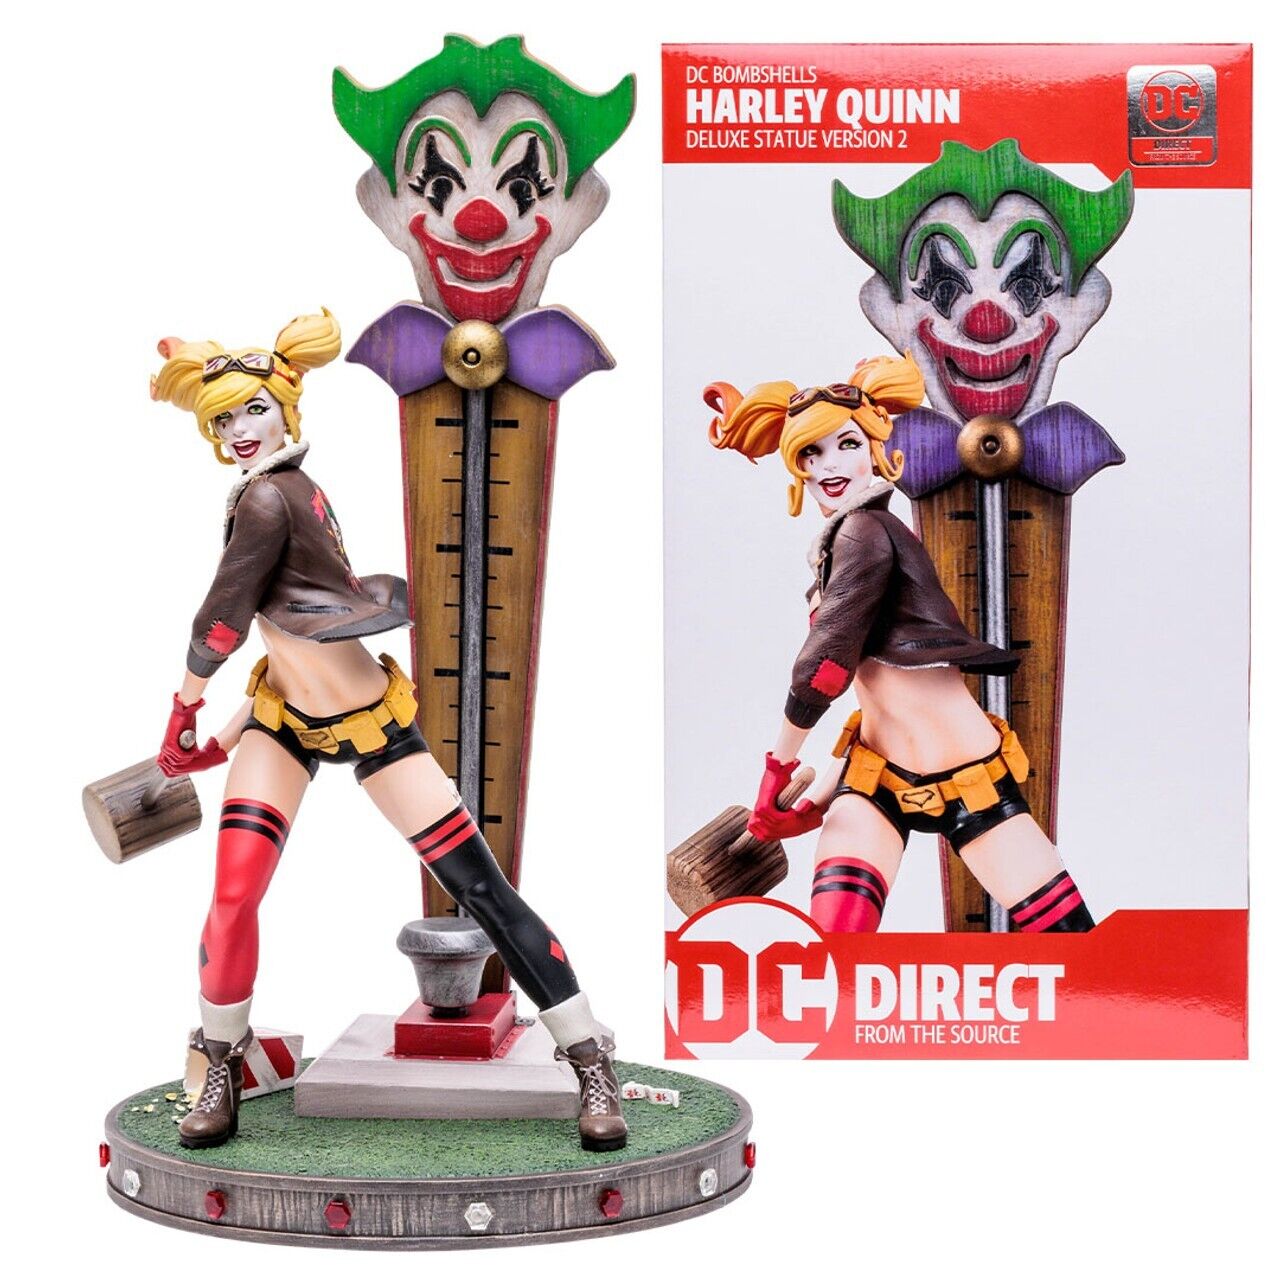 DC BOMBSHELLS HARLEY QUINN DELUXE VERSION 2 RESIN STATUE - The Comic Construct